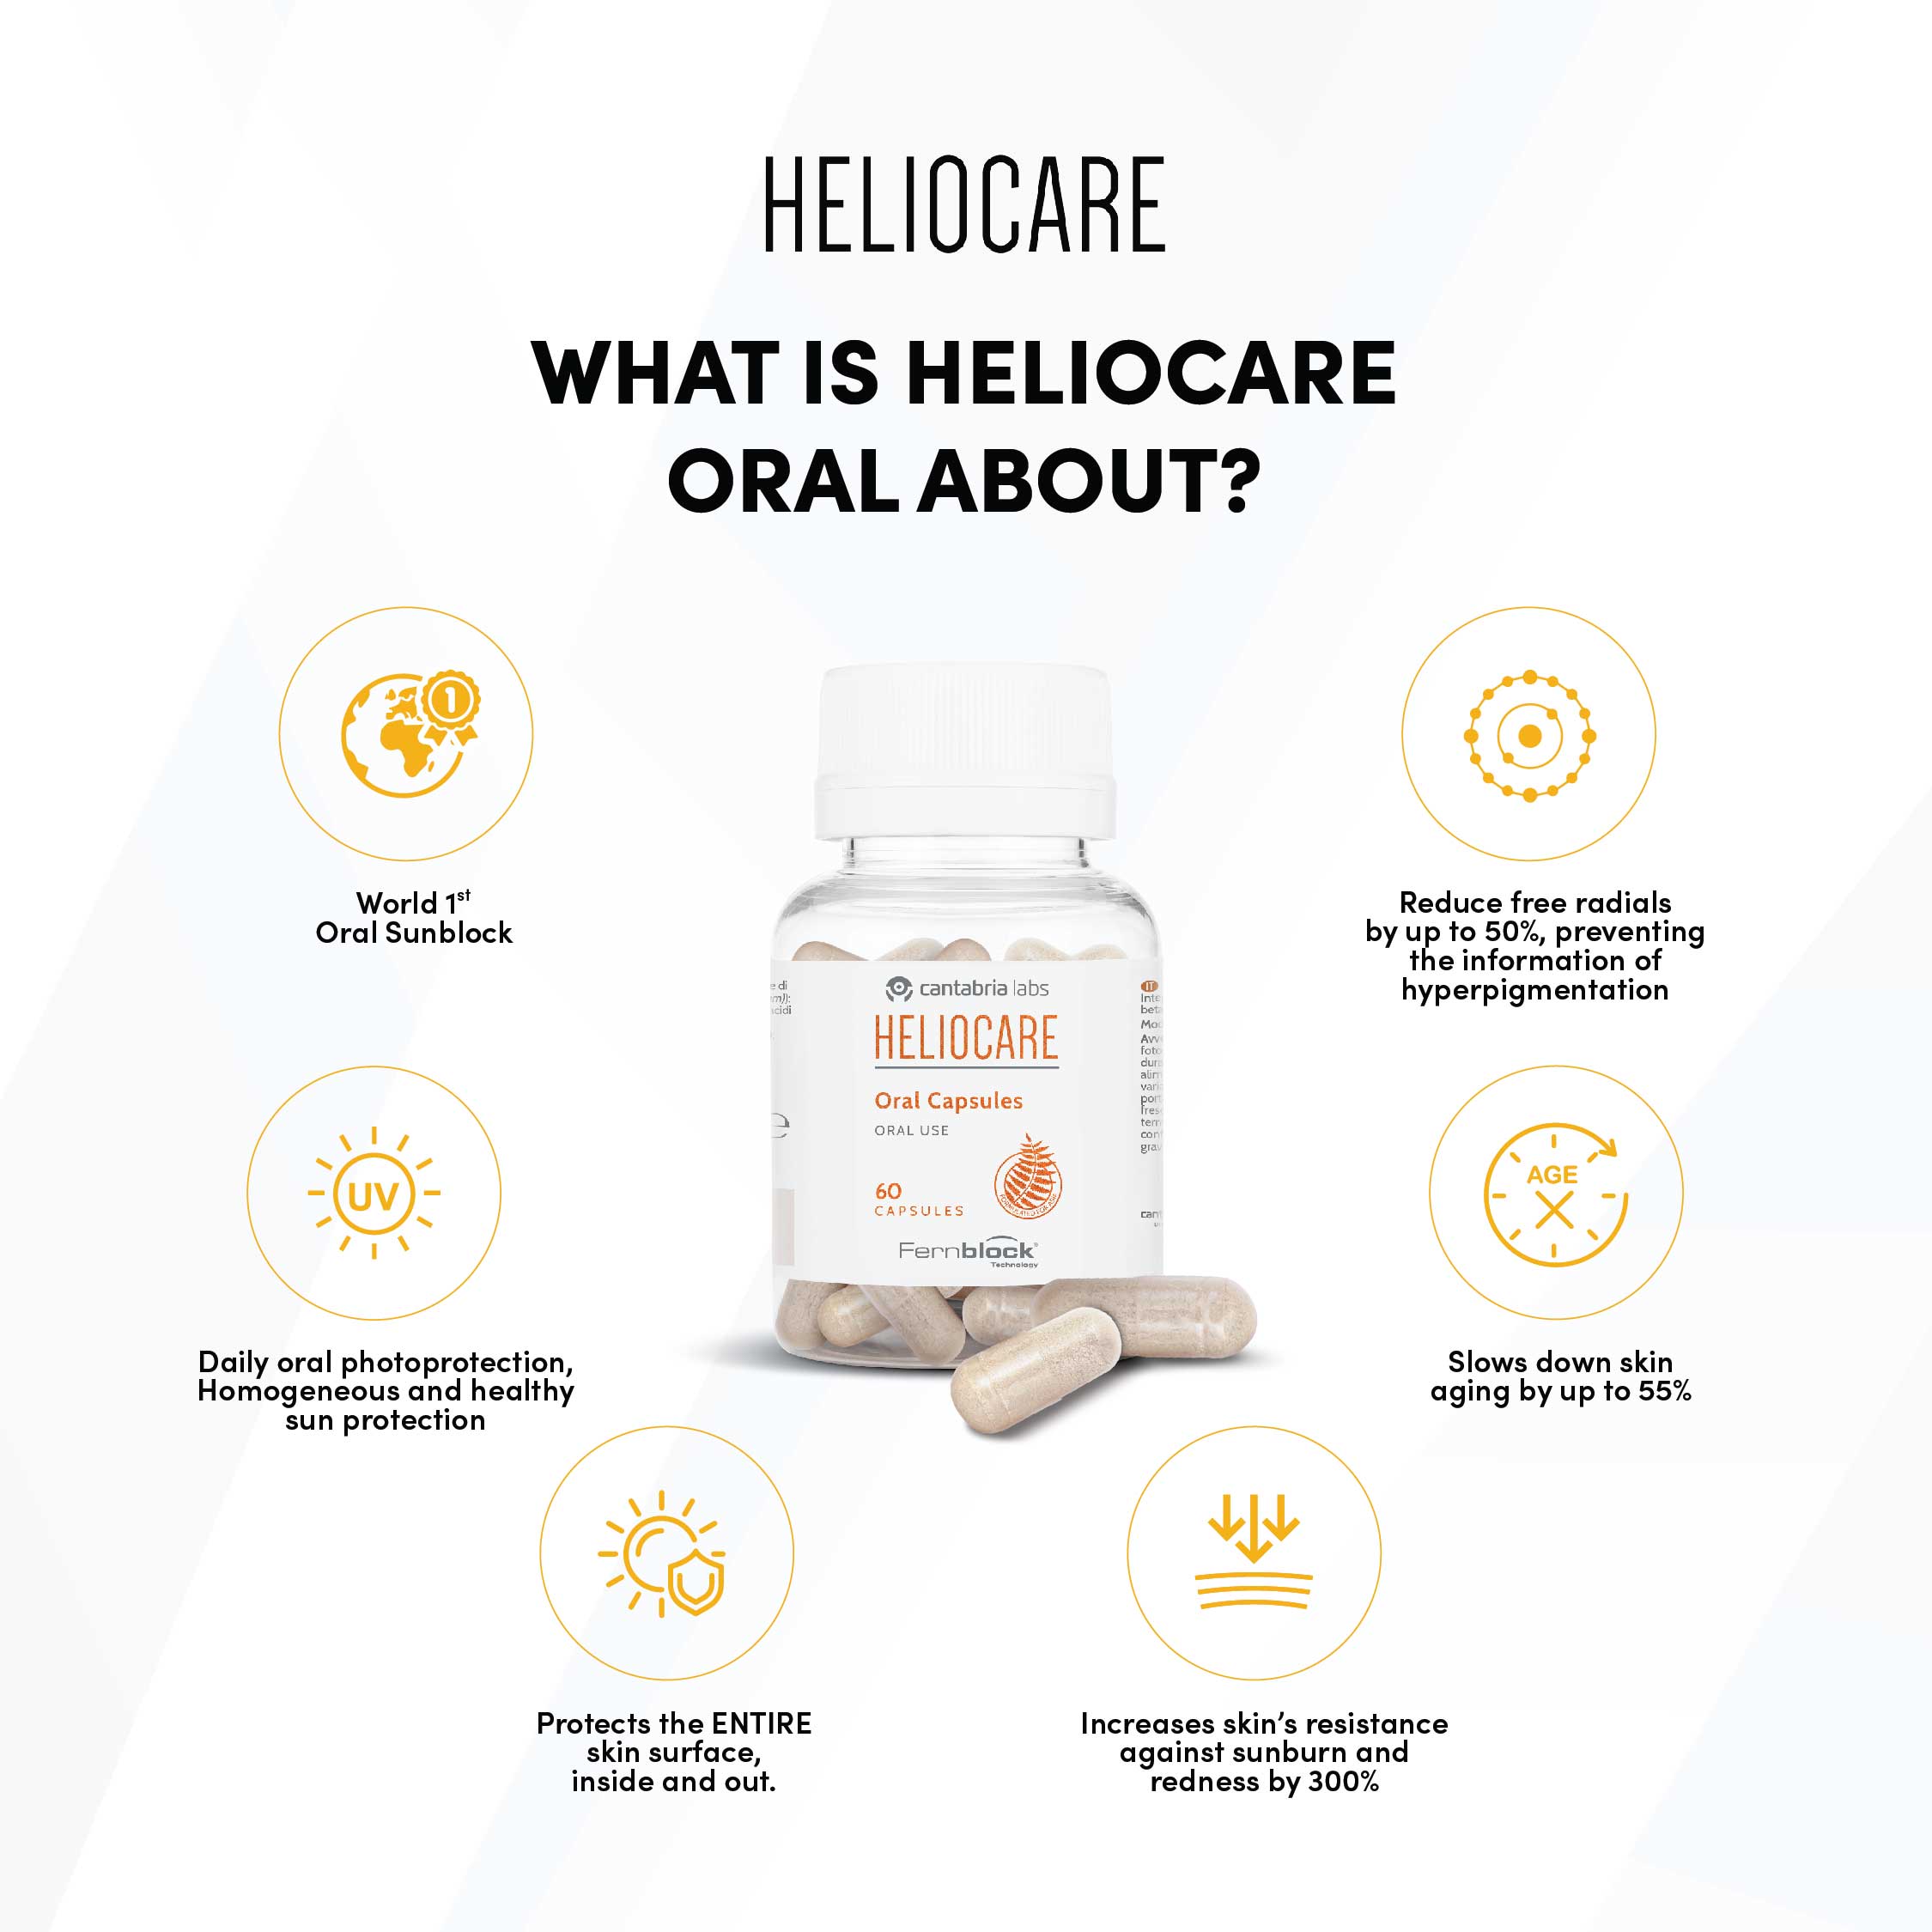 Heliocare Oral Infographic - What is Heliocare Oral about